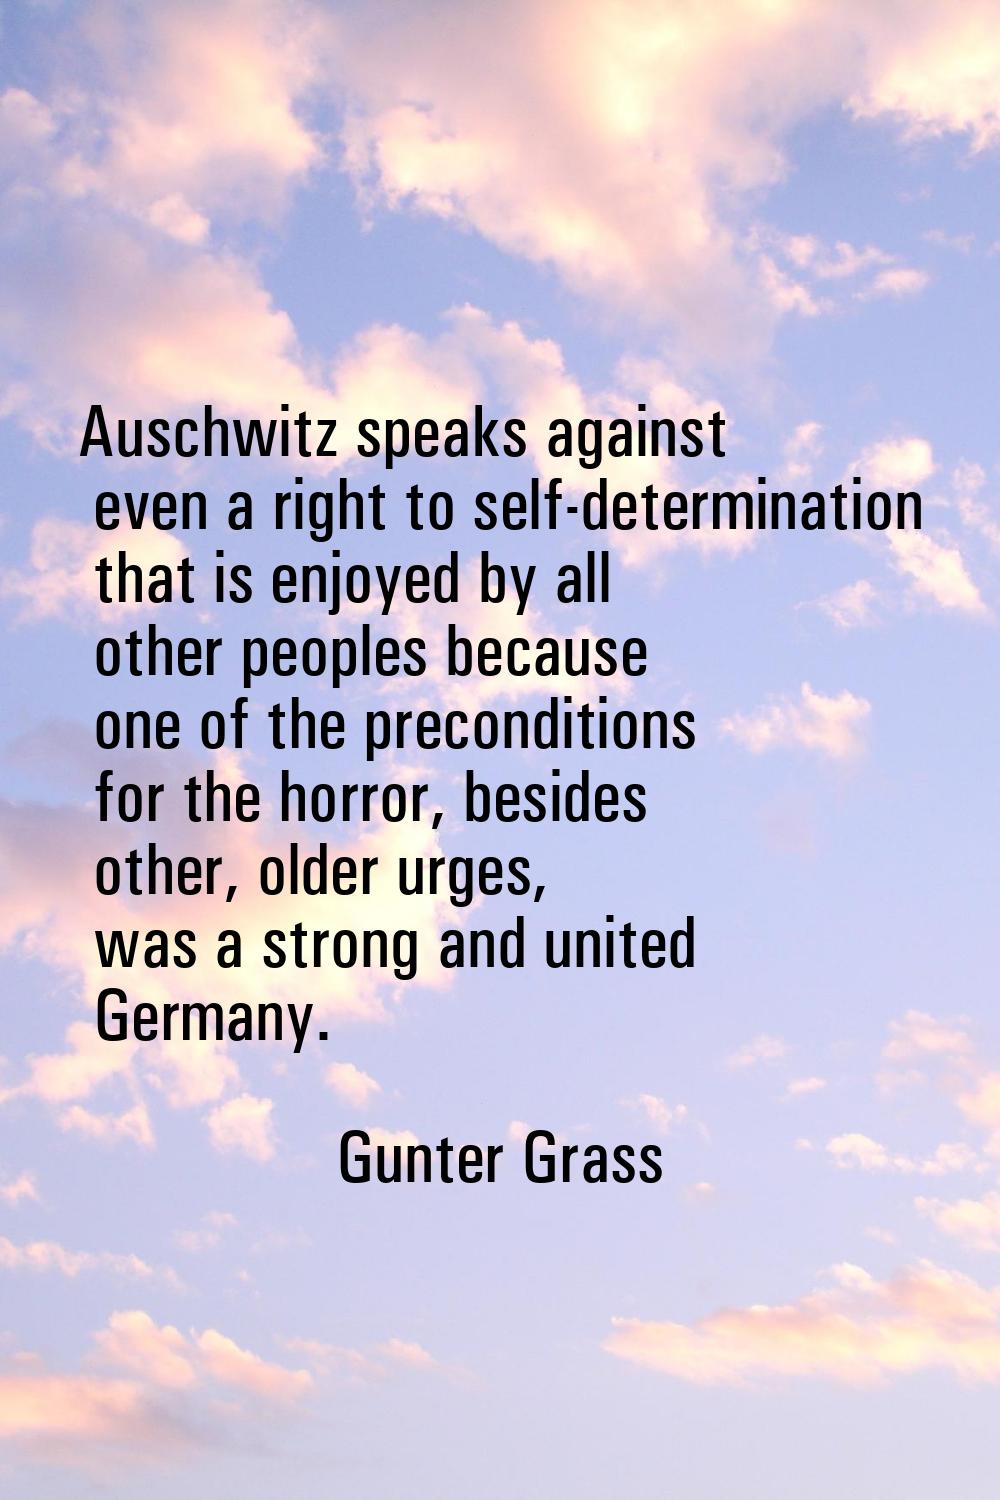 Auschwitz speaks against even a right to self-determination that is enjoyed by all other peoples be